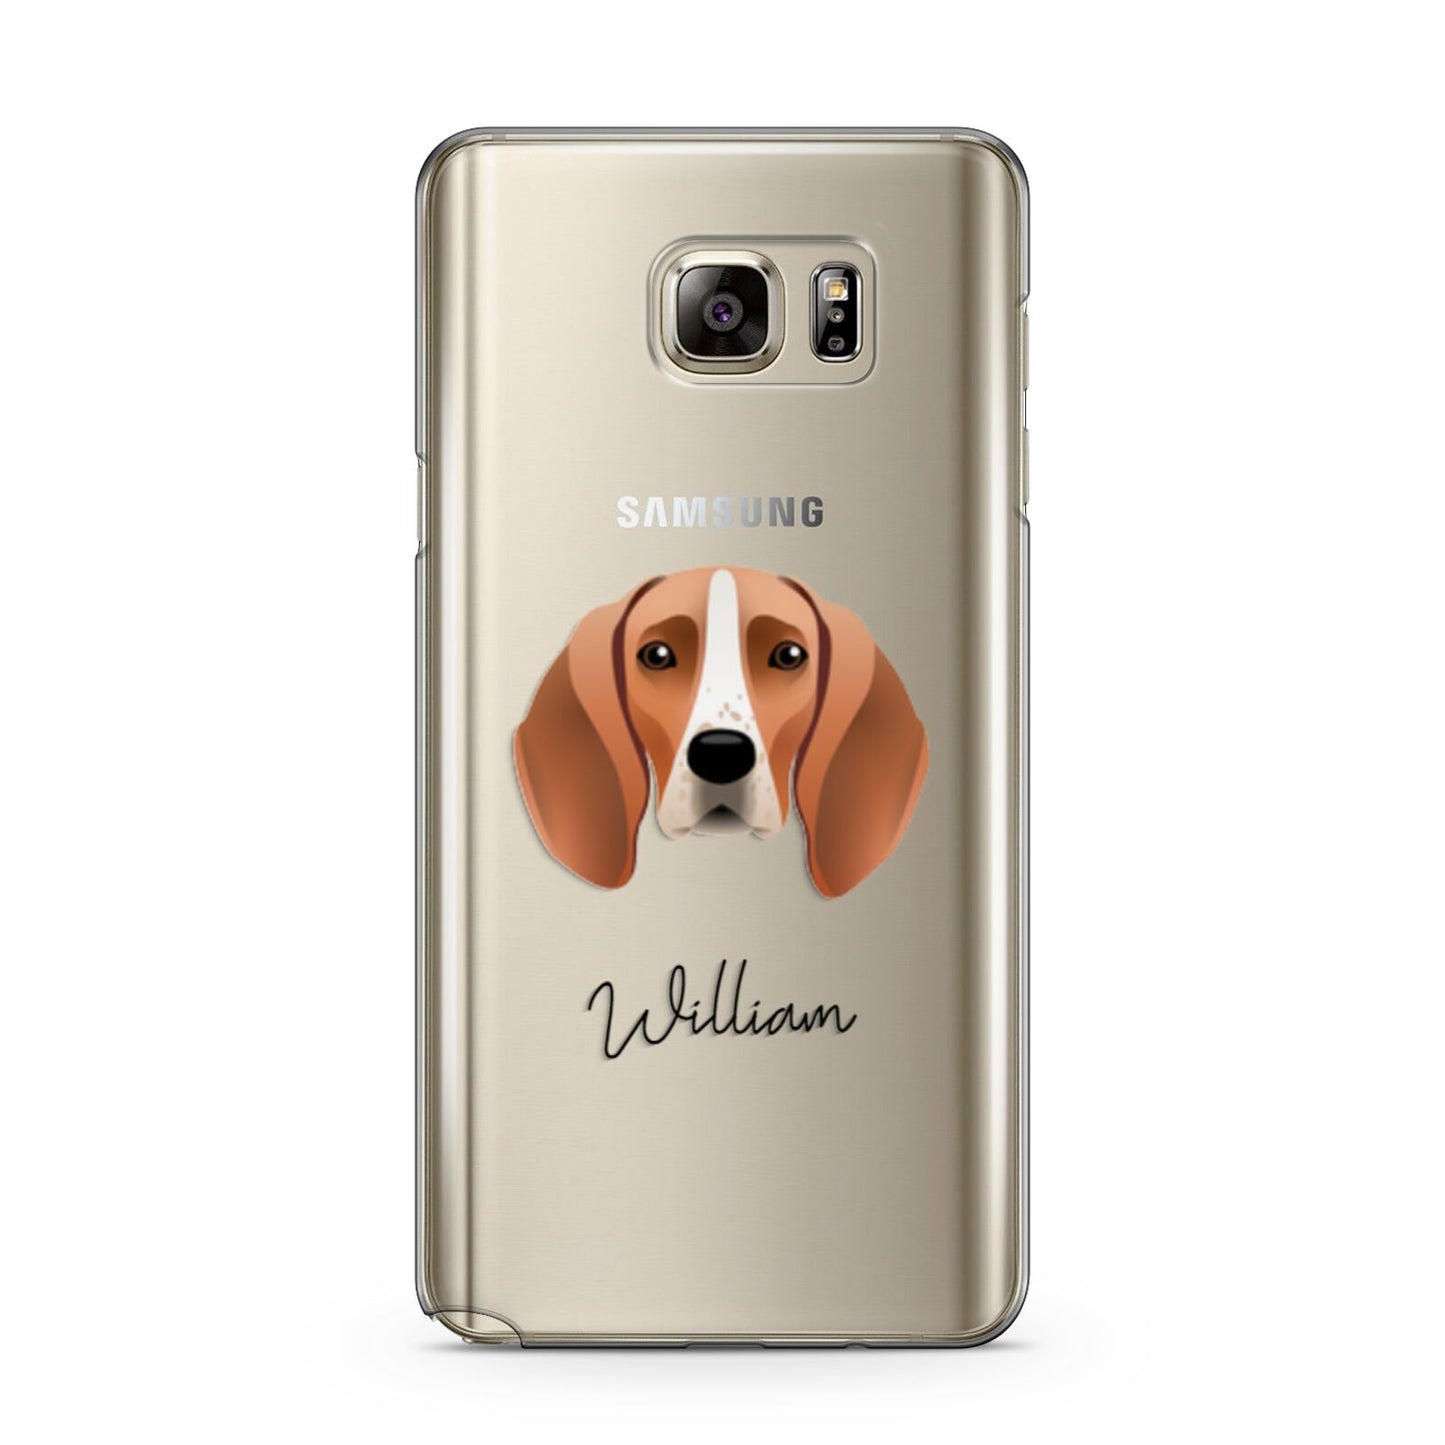 Foxhound Personalised Samsung Galaxy Note 5 Case